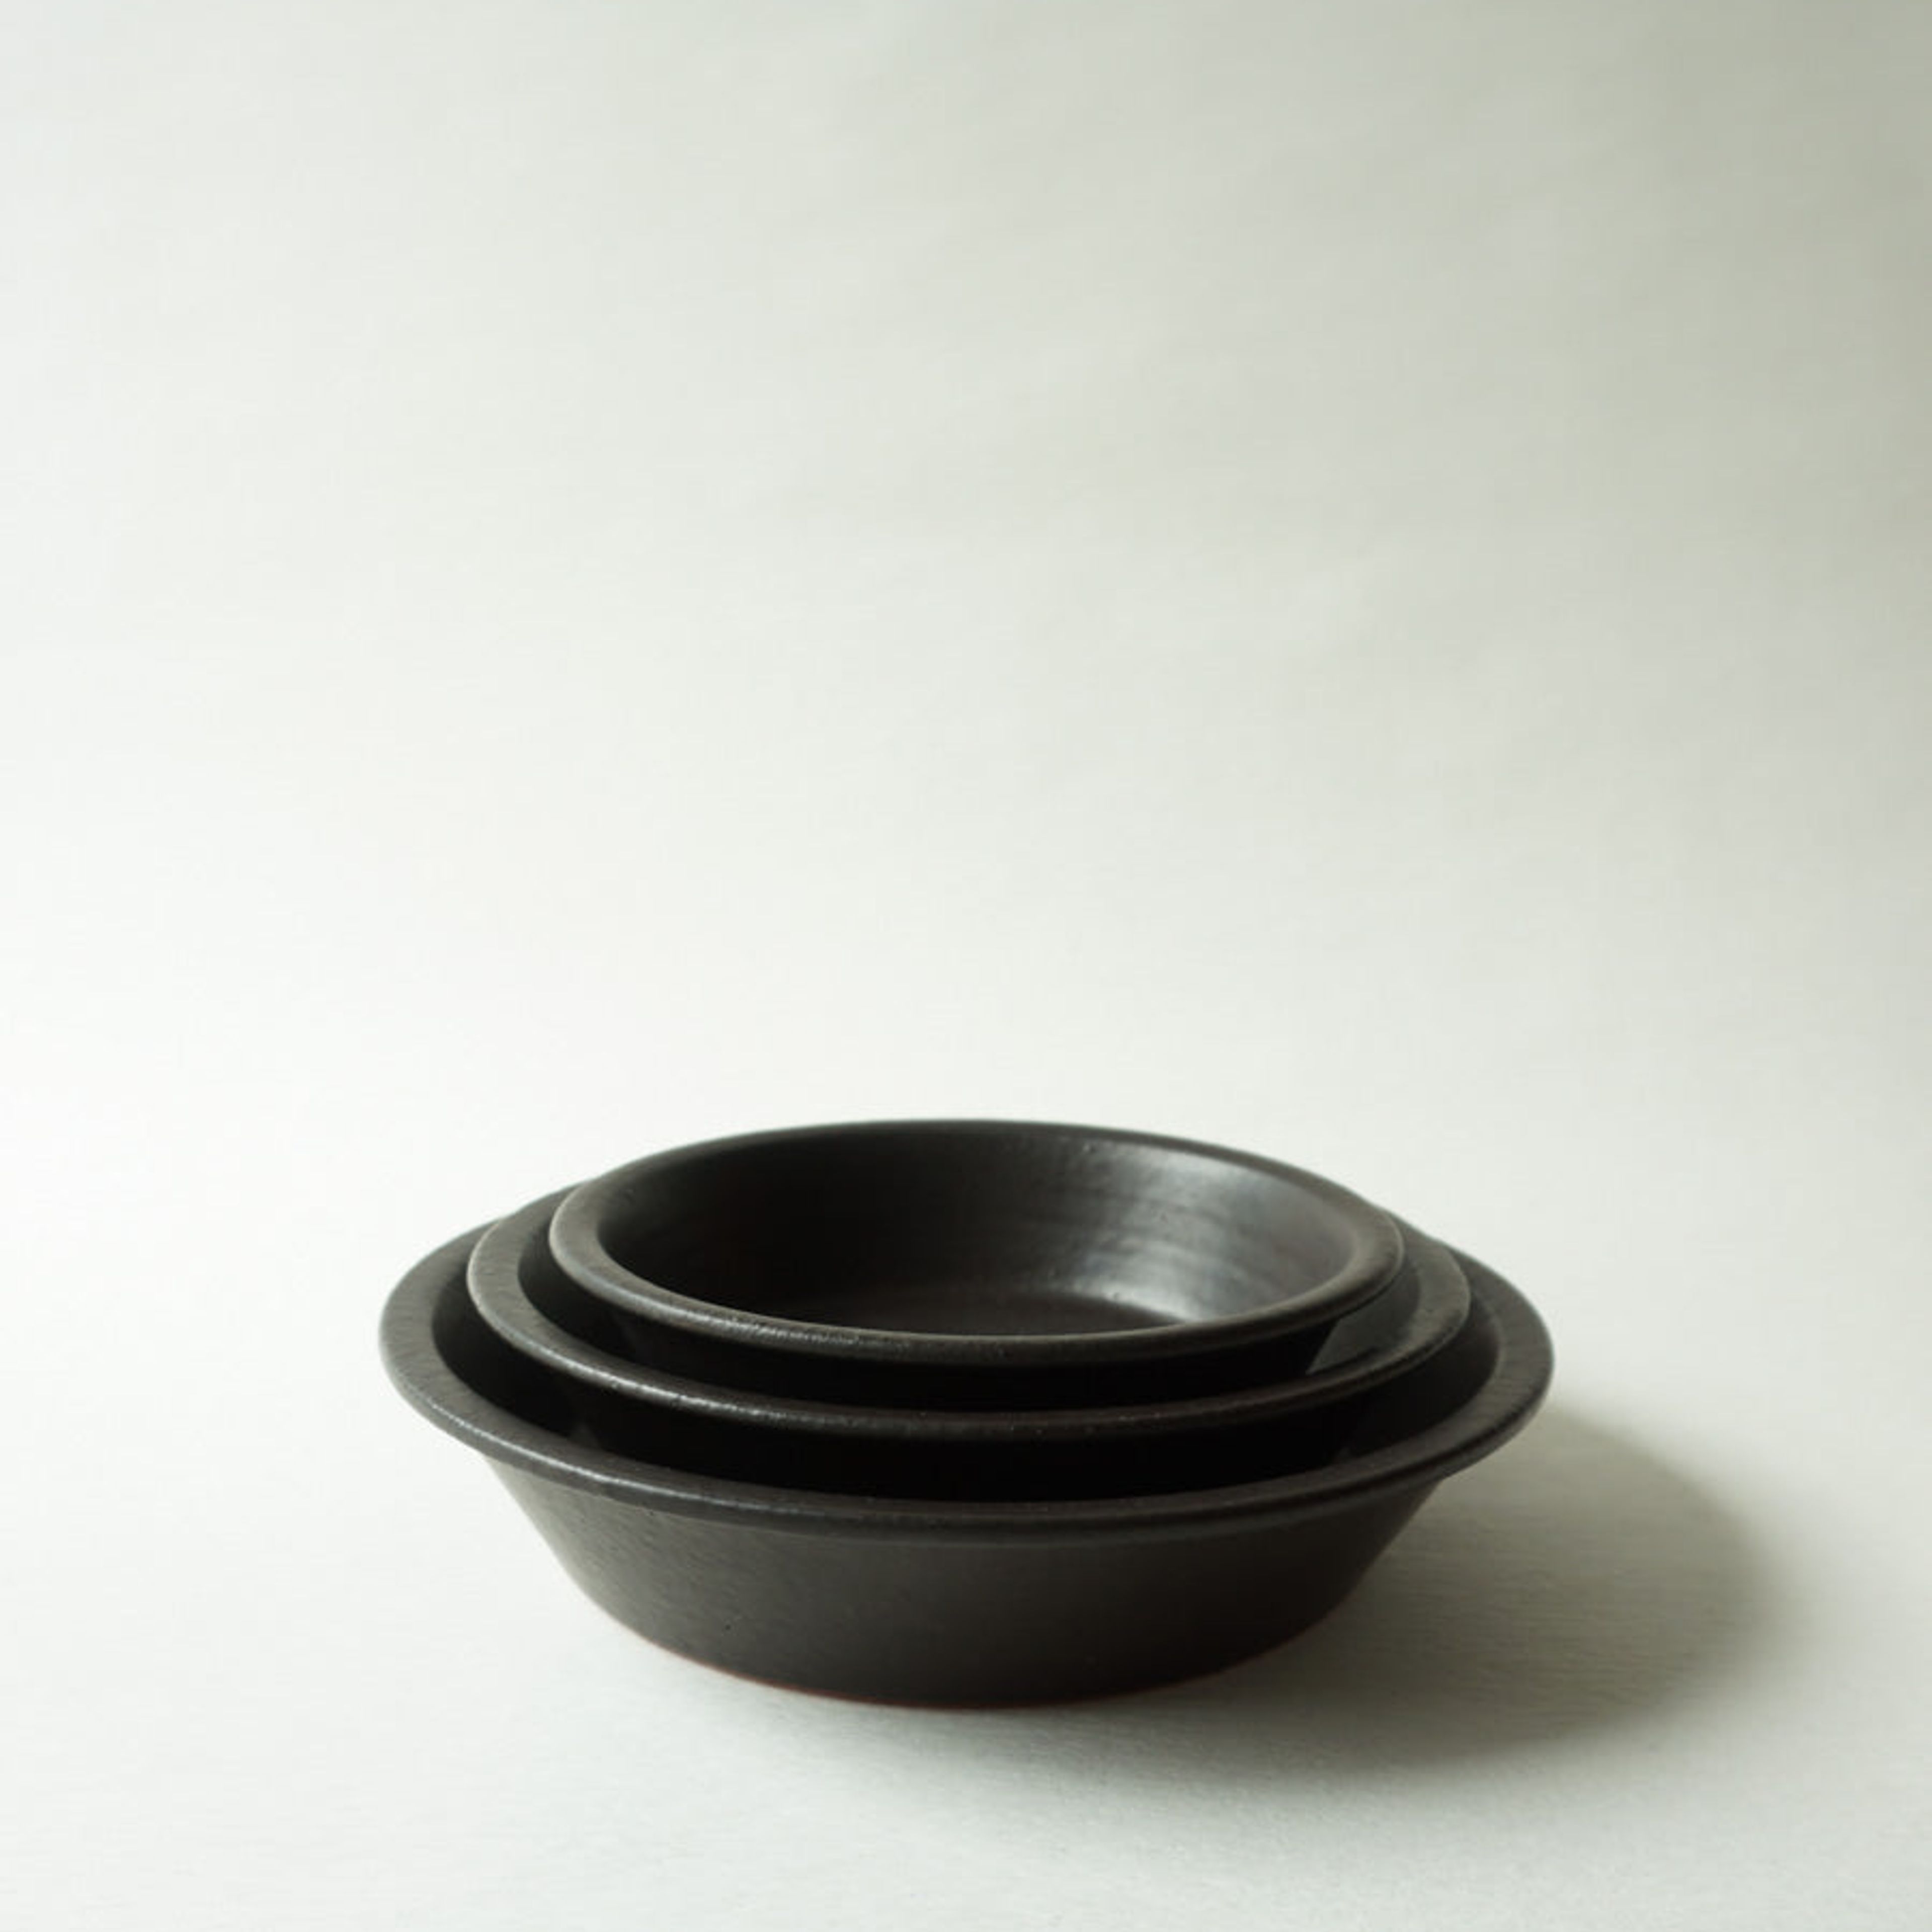 Black Stackable Large Shallow Bowl